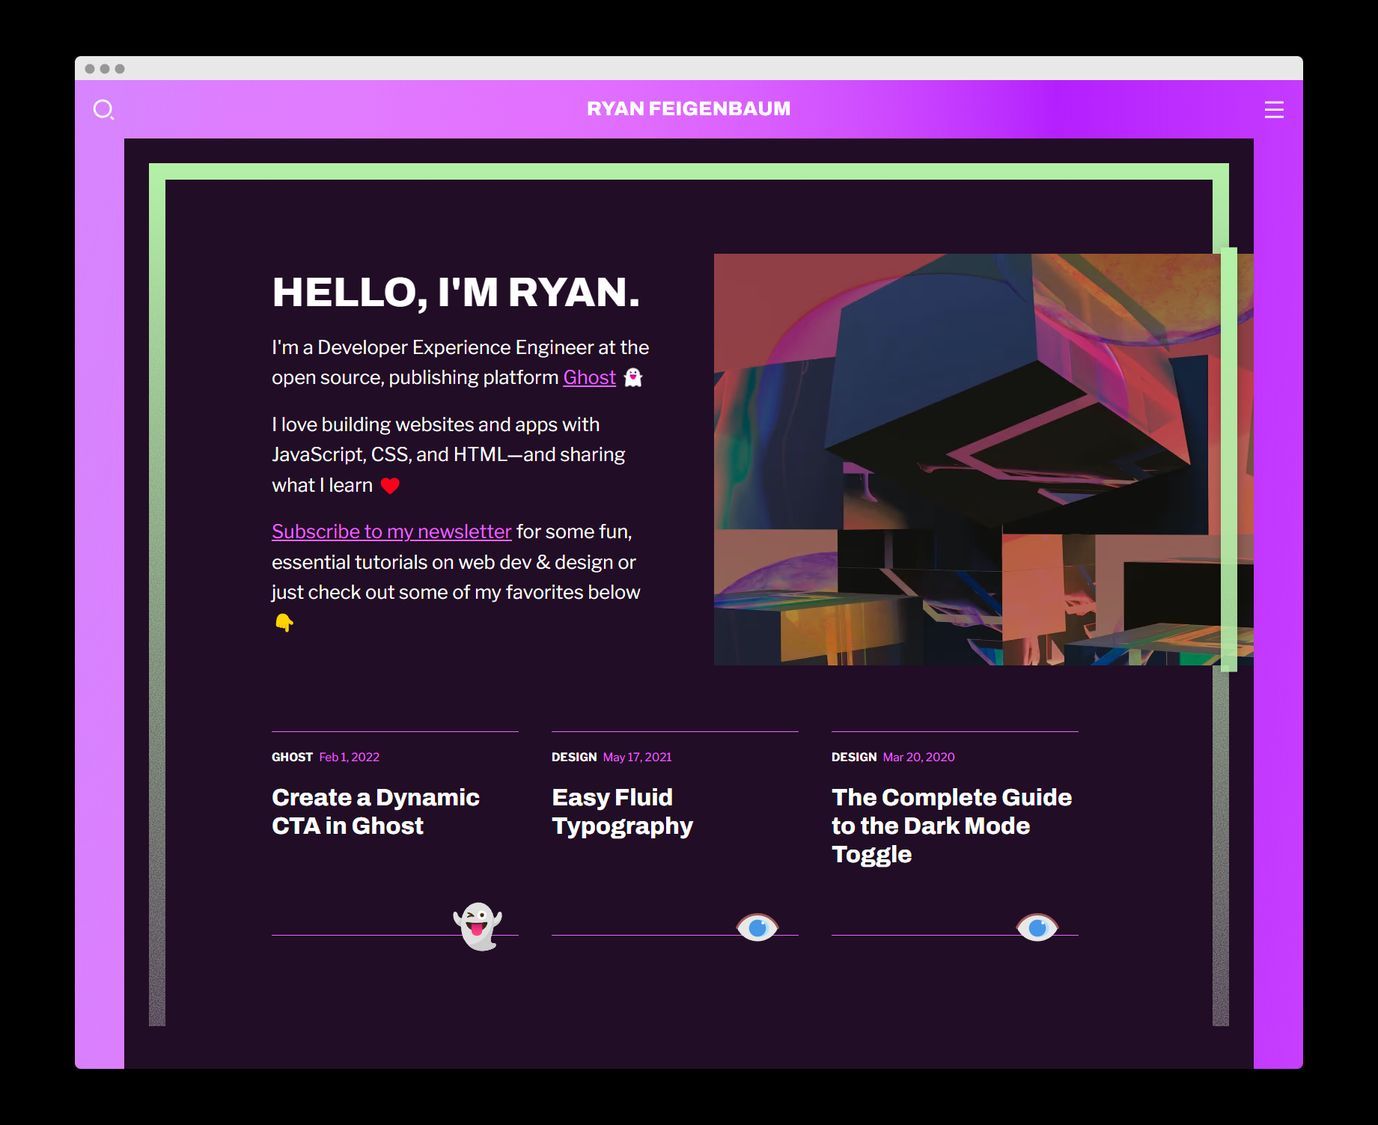 A strikingly beautiful website redesign, featuring bold colors